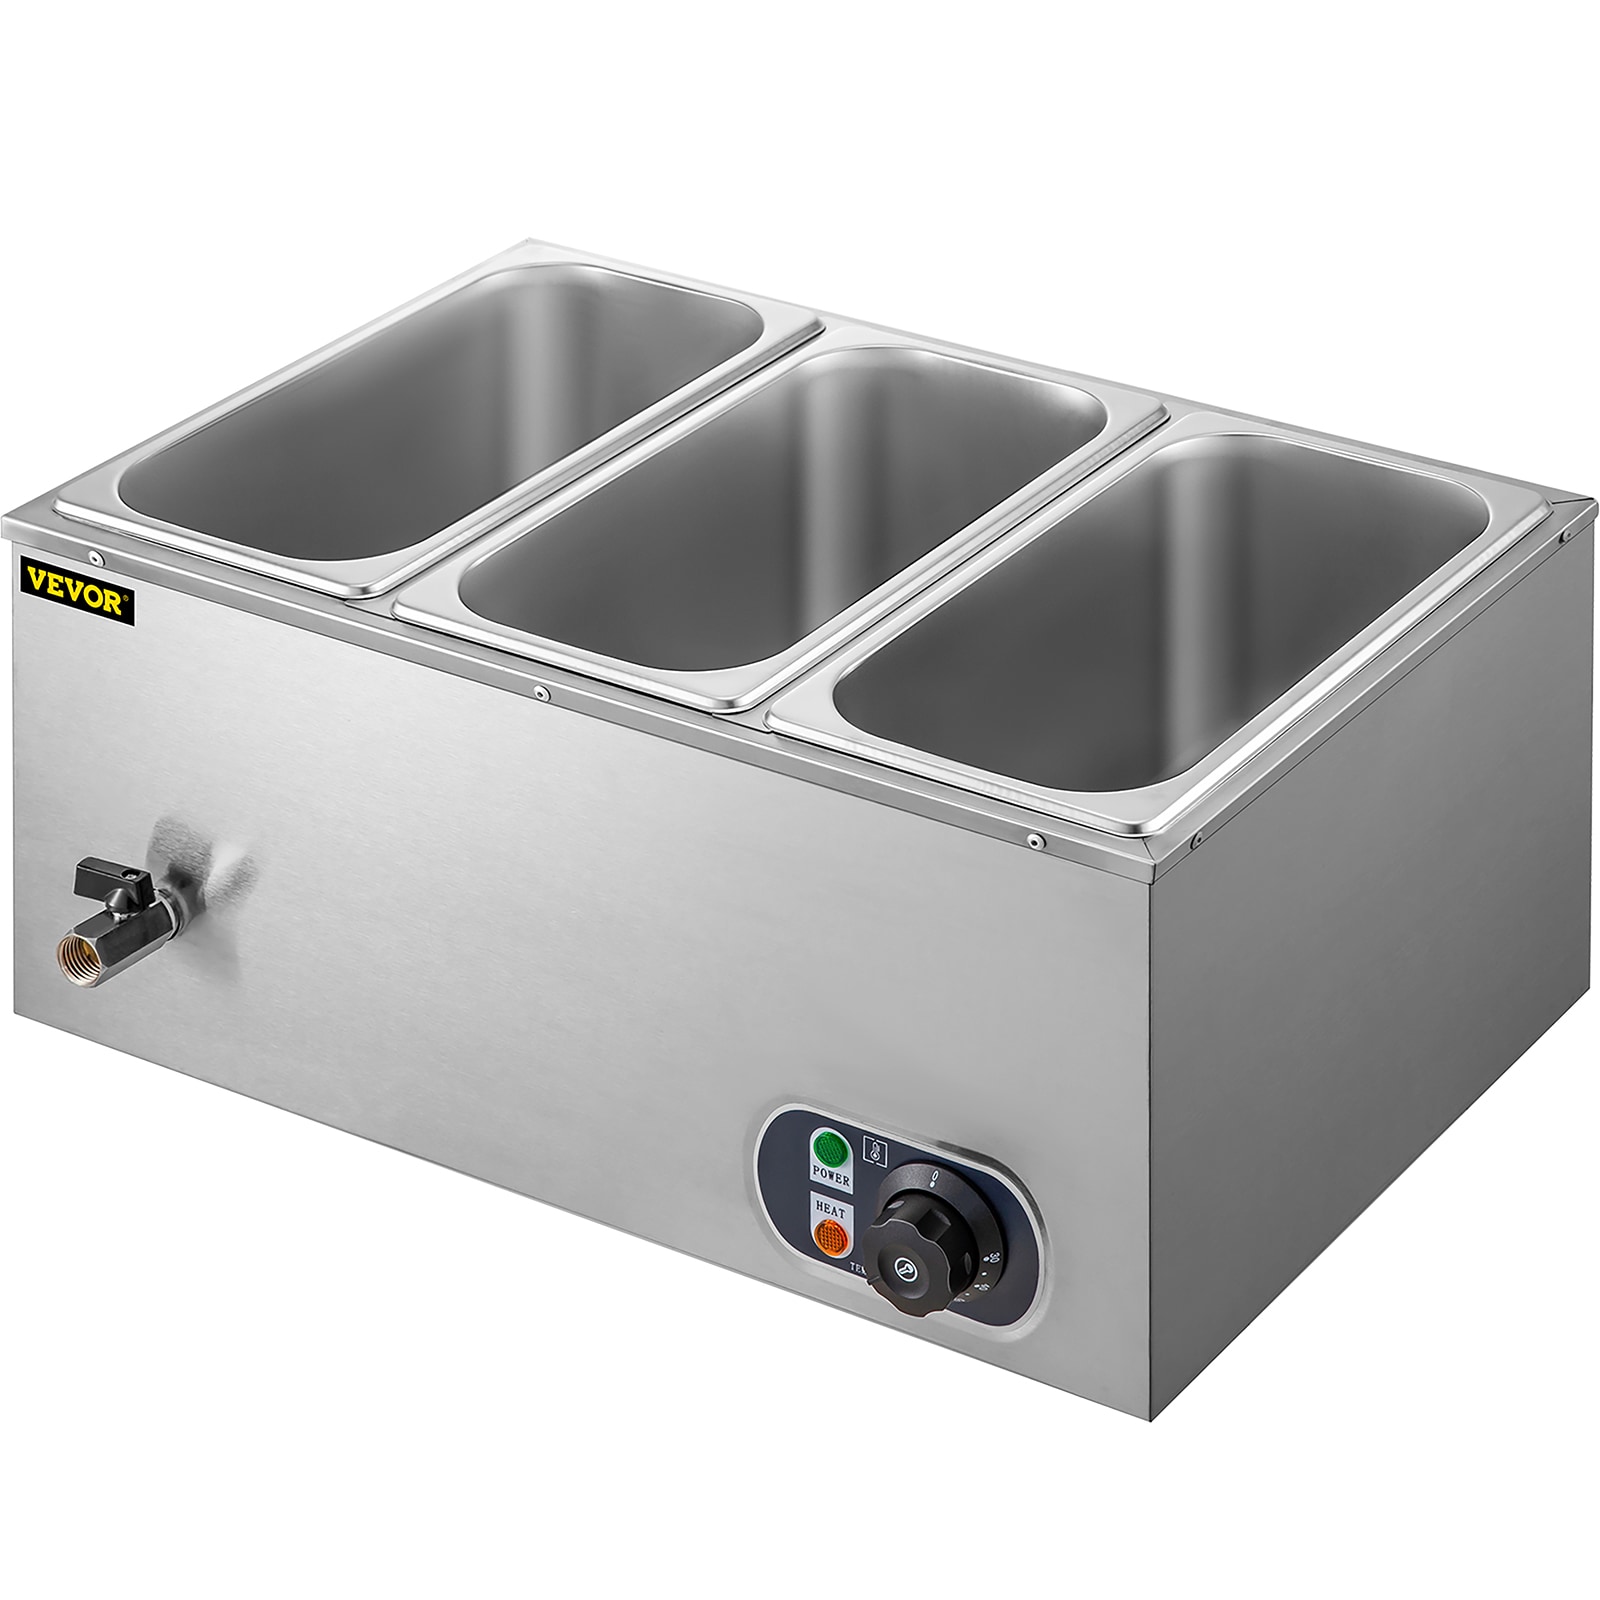 Stainless Steel 1 Quarts Warmers, Heaters, Burners And Servers